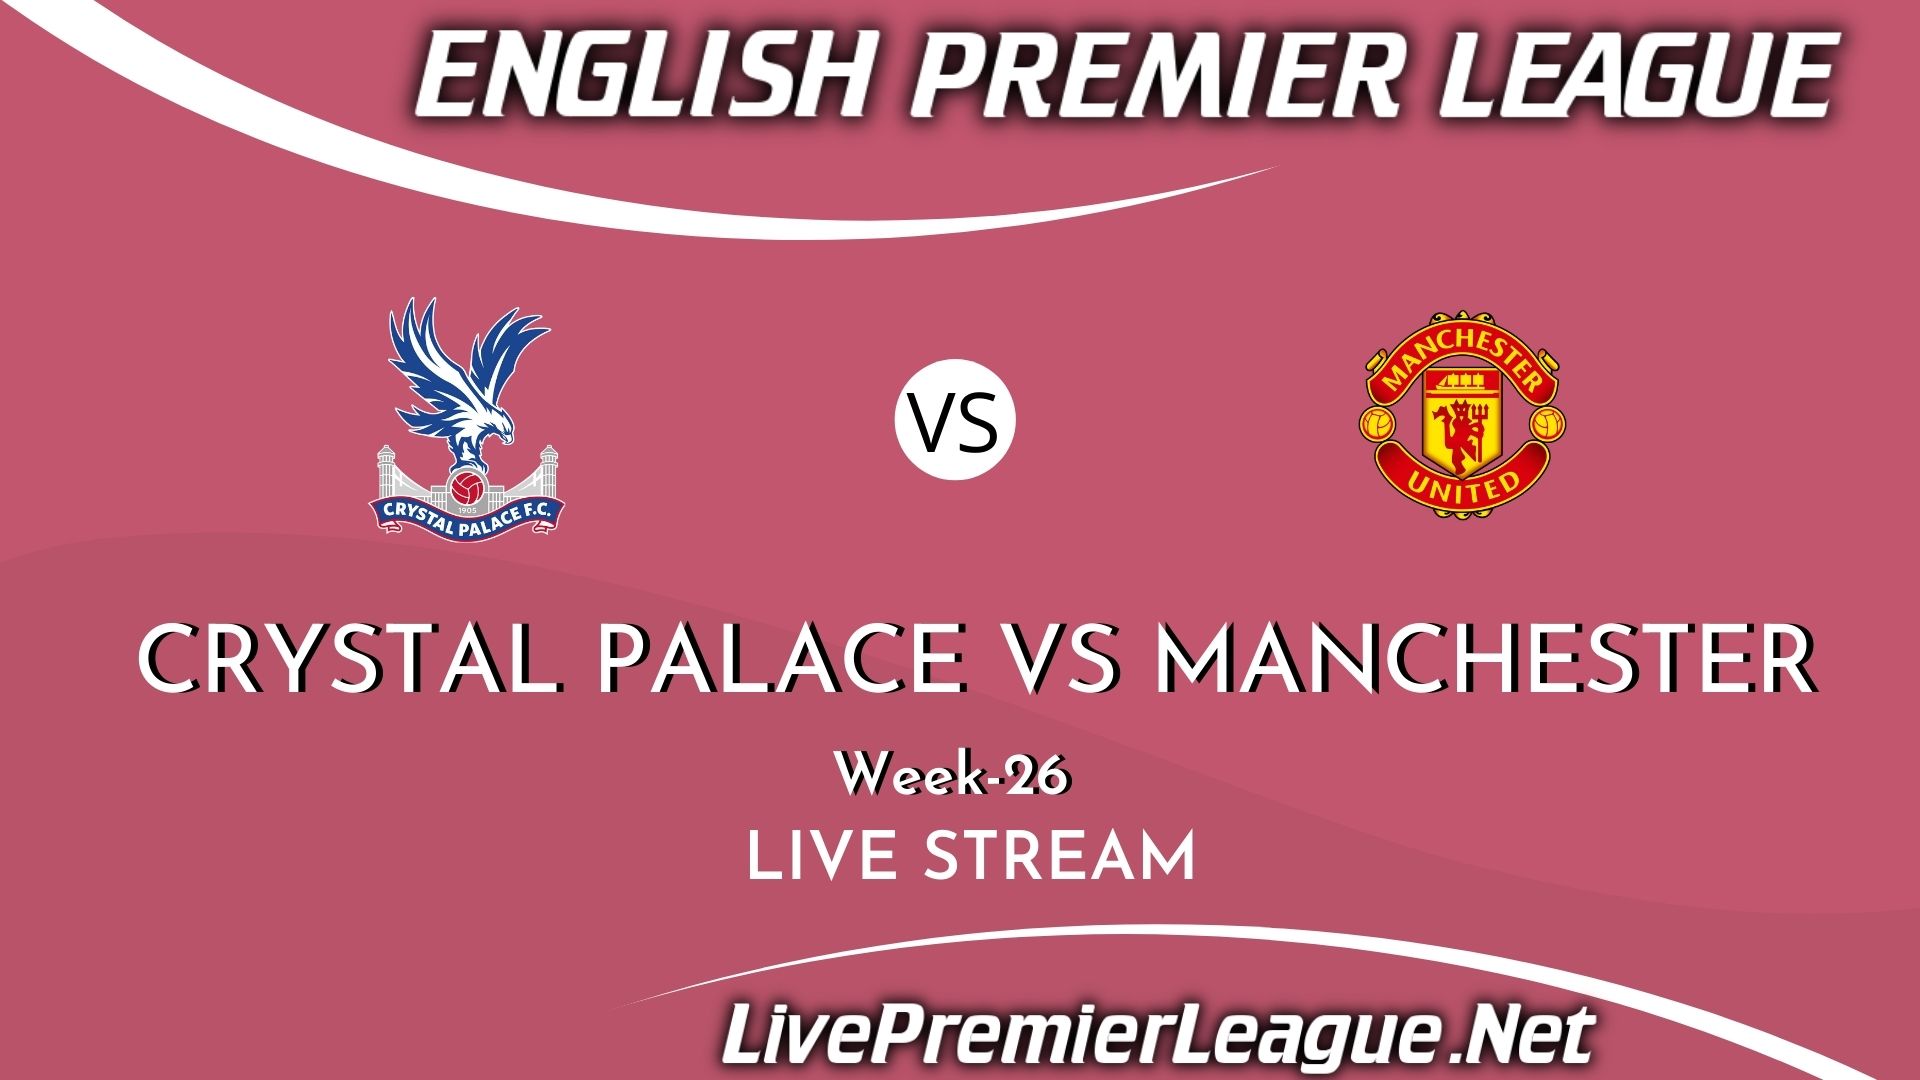 Crystal Palace Vs Manchester United Live Stream 2021 | Week 26